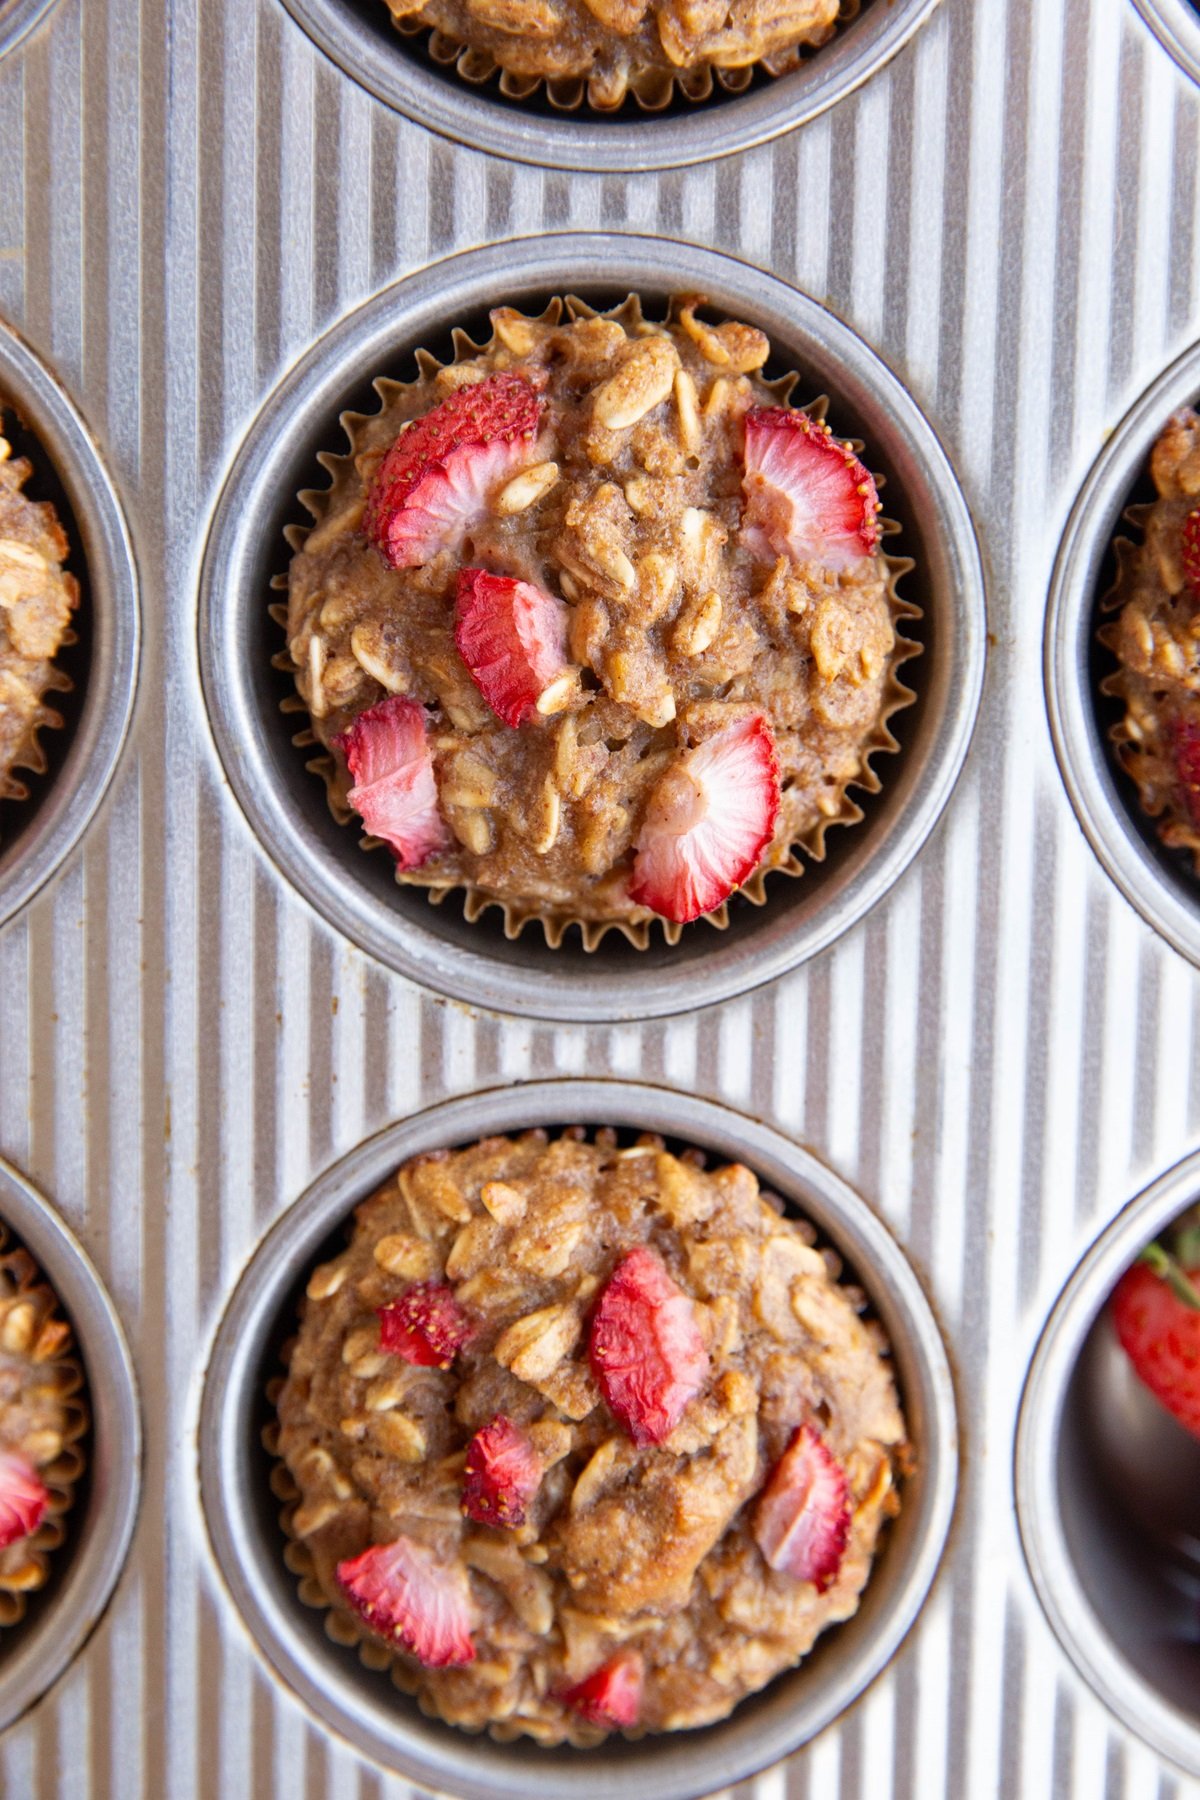 Strawberry oat muffins in a muffin tin, fresh out of the oven and ready to eat.